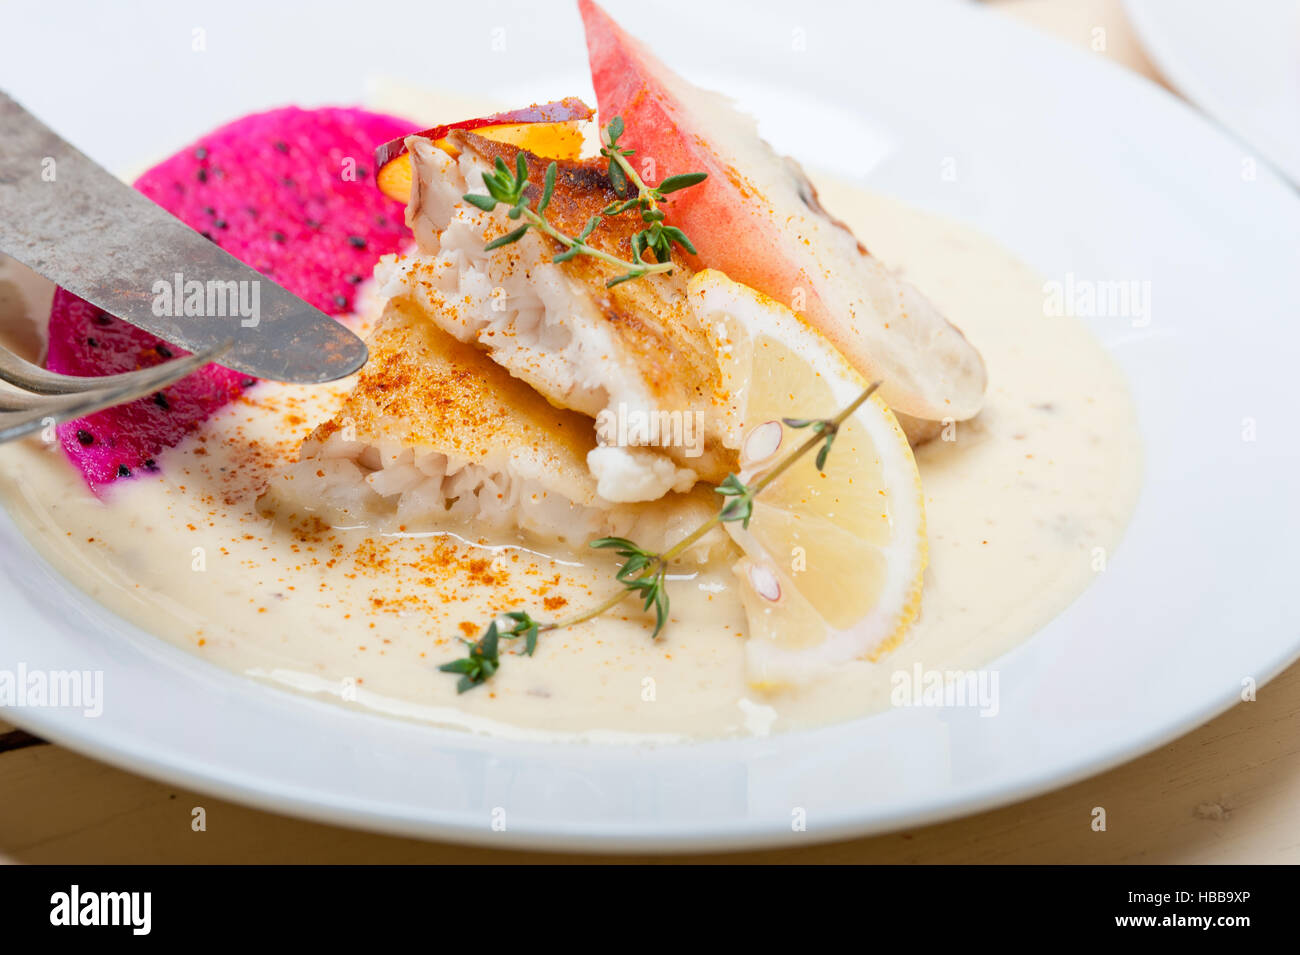 sea bream fillet butter pan fried Stock Photo